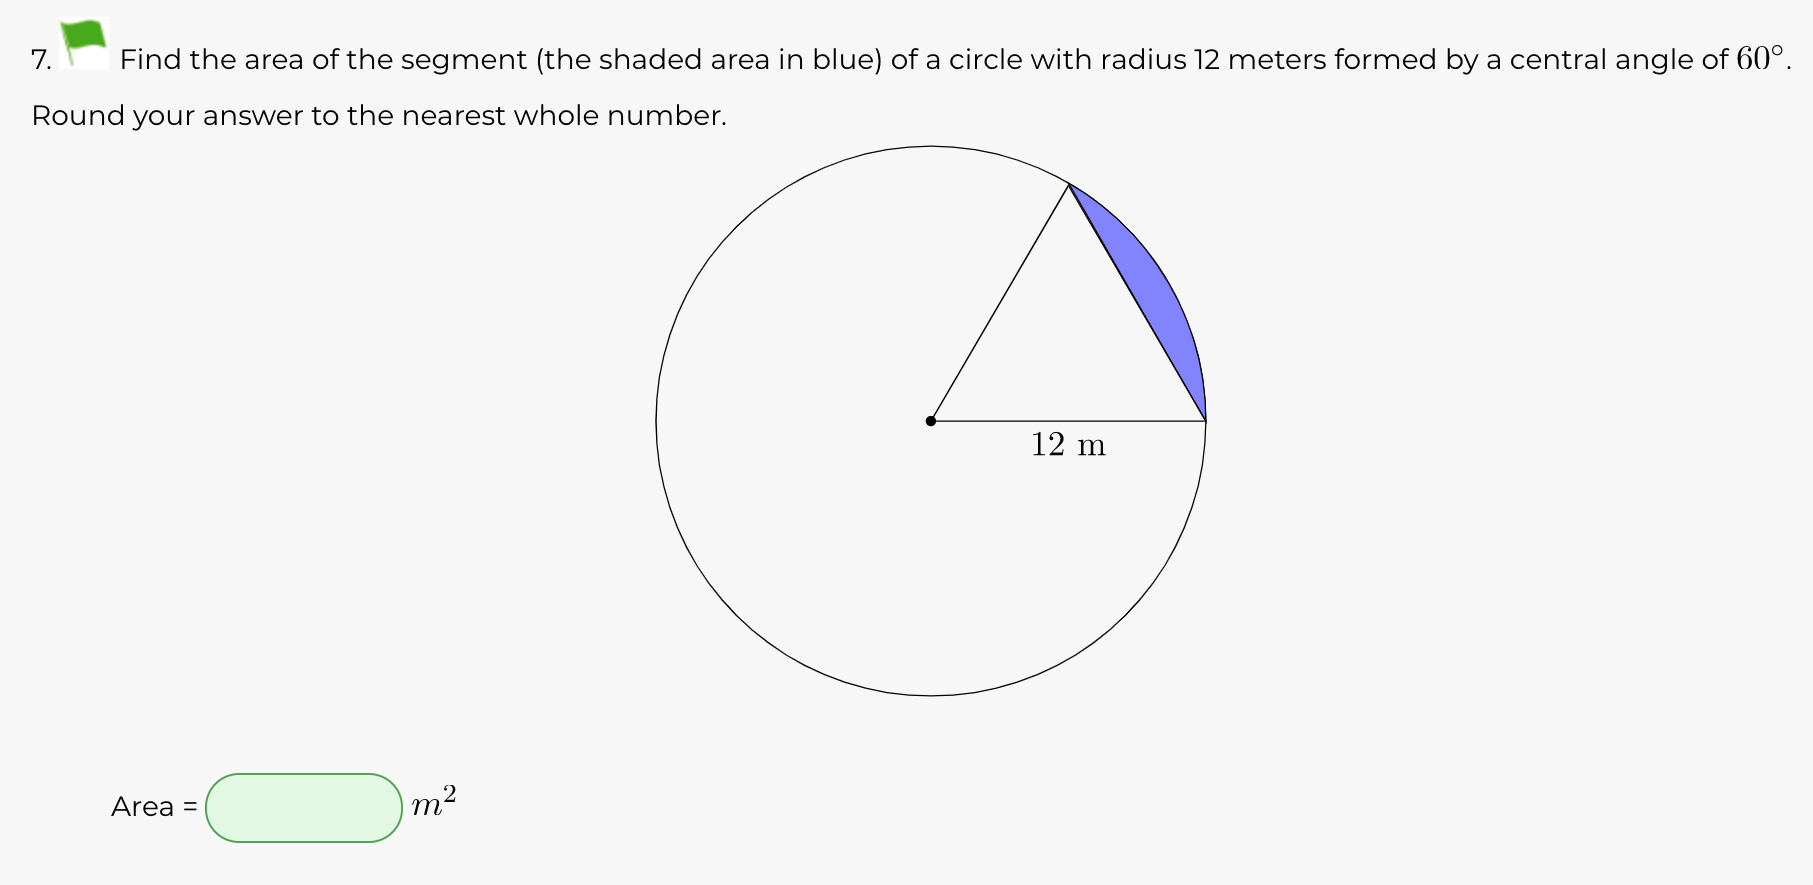 7.
Find the area of the segment (the shaded area in blue) of a circle with radius 12 meters formed by a central angle of 60°.
Round your answer to the nearest whole number.
12 m
Area =
m2
